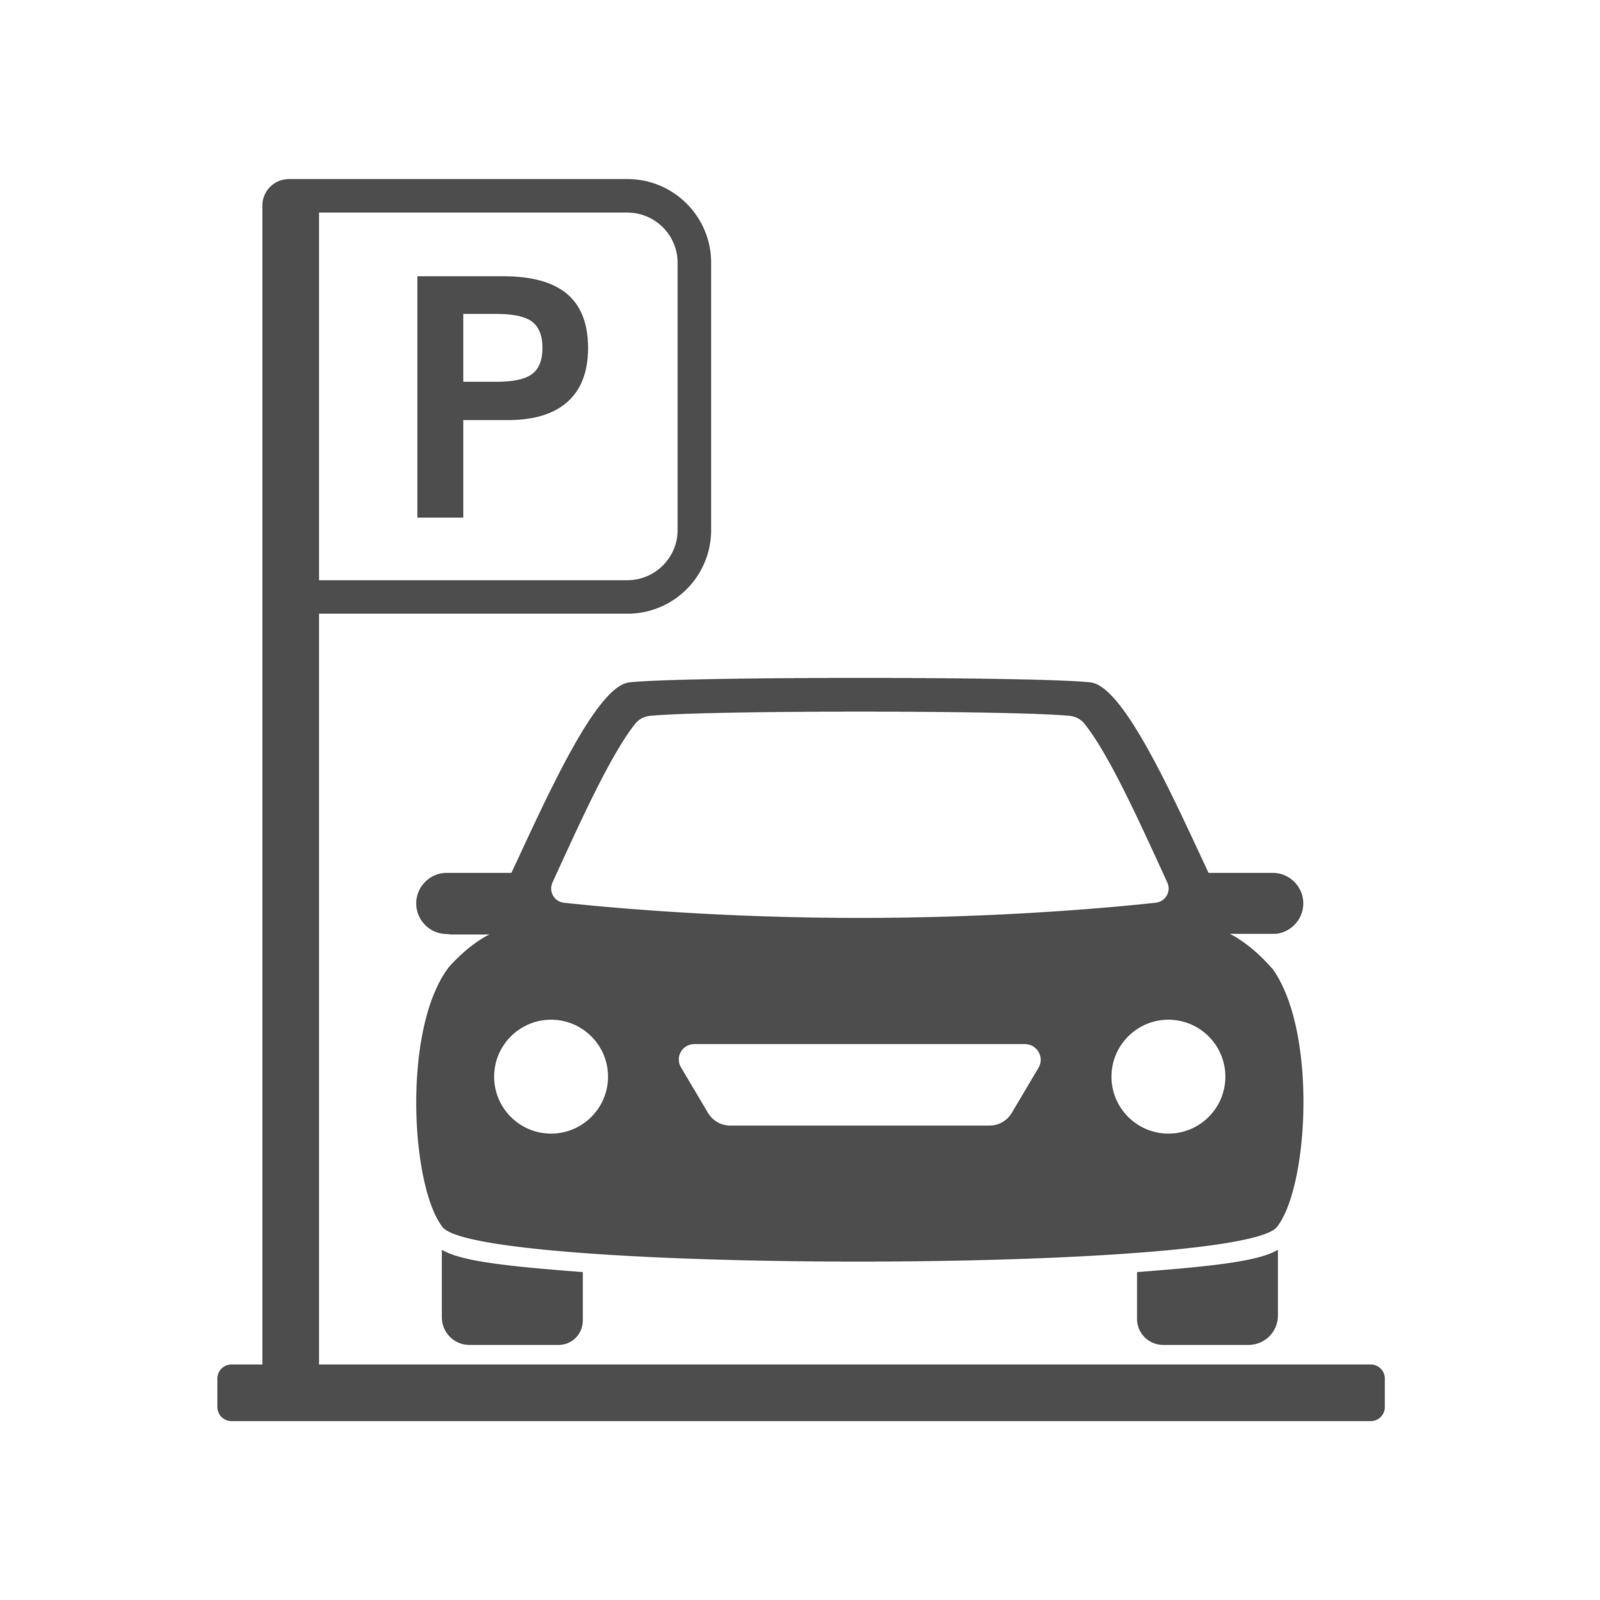 parking silhouette vector icon isolated on white. car parking icon for web, mobile apps, ui design and print by govindamadhava108